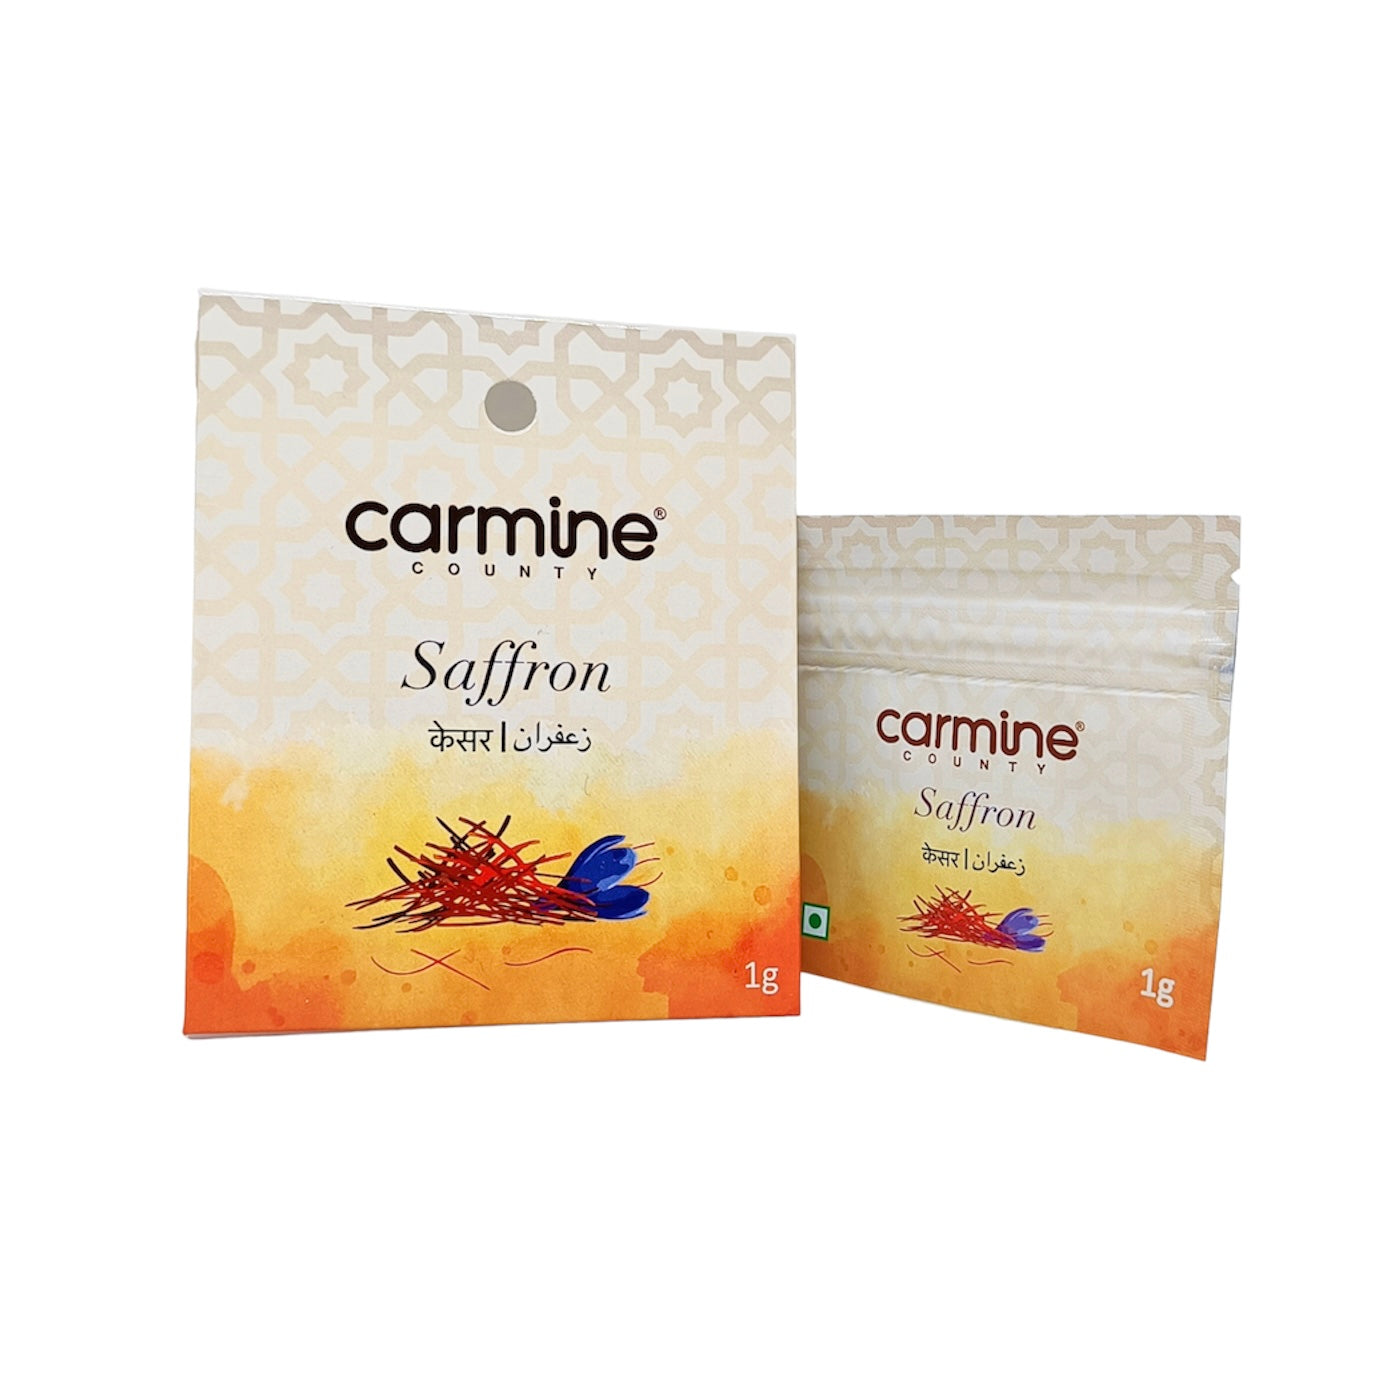 Carmine County Combo of Pure and Natural Premium Saffron Threads, Powder and Extract